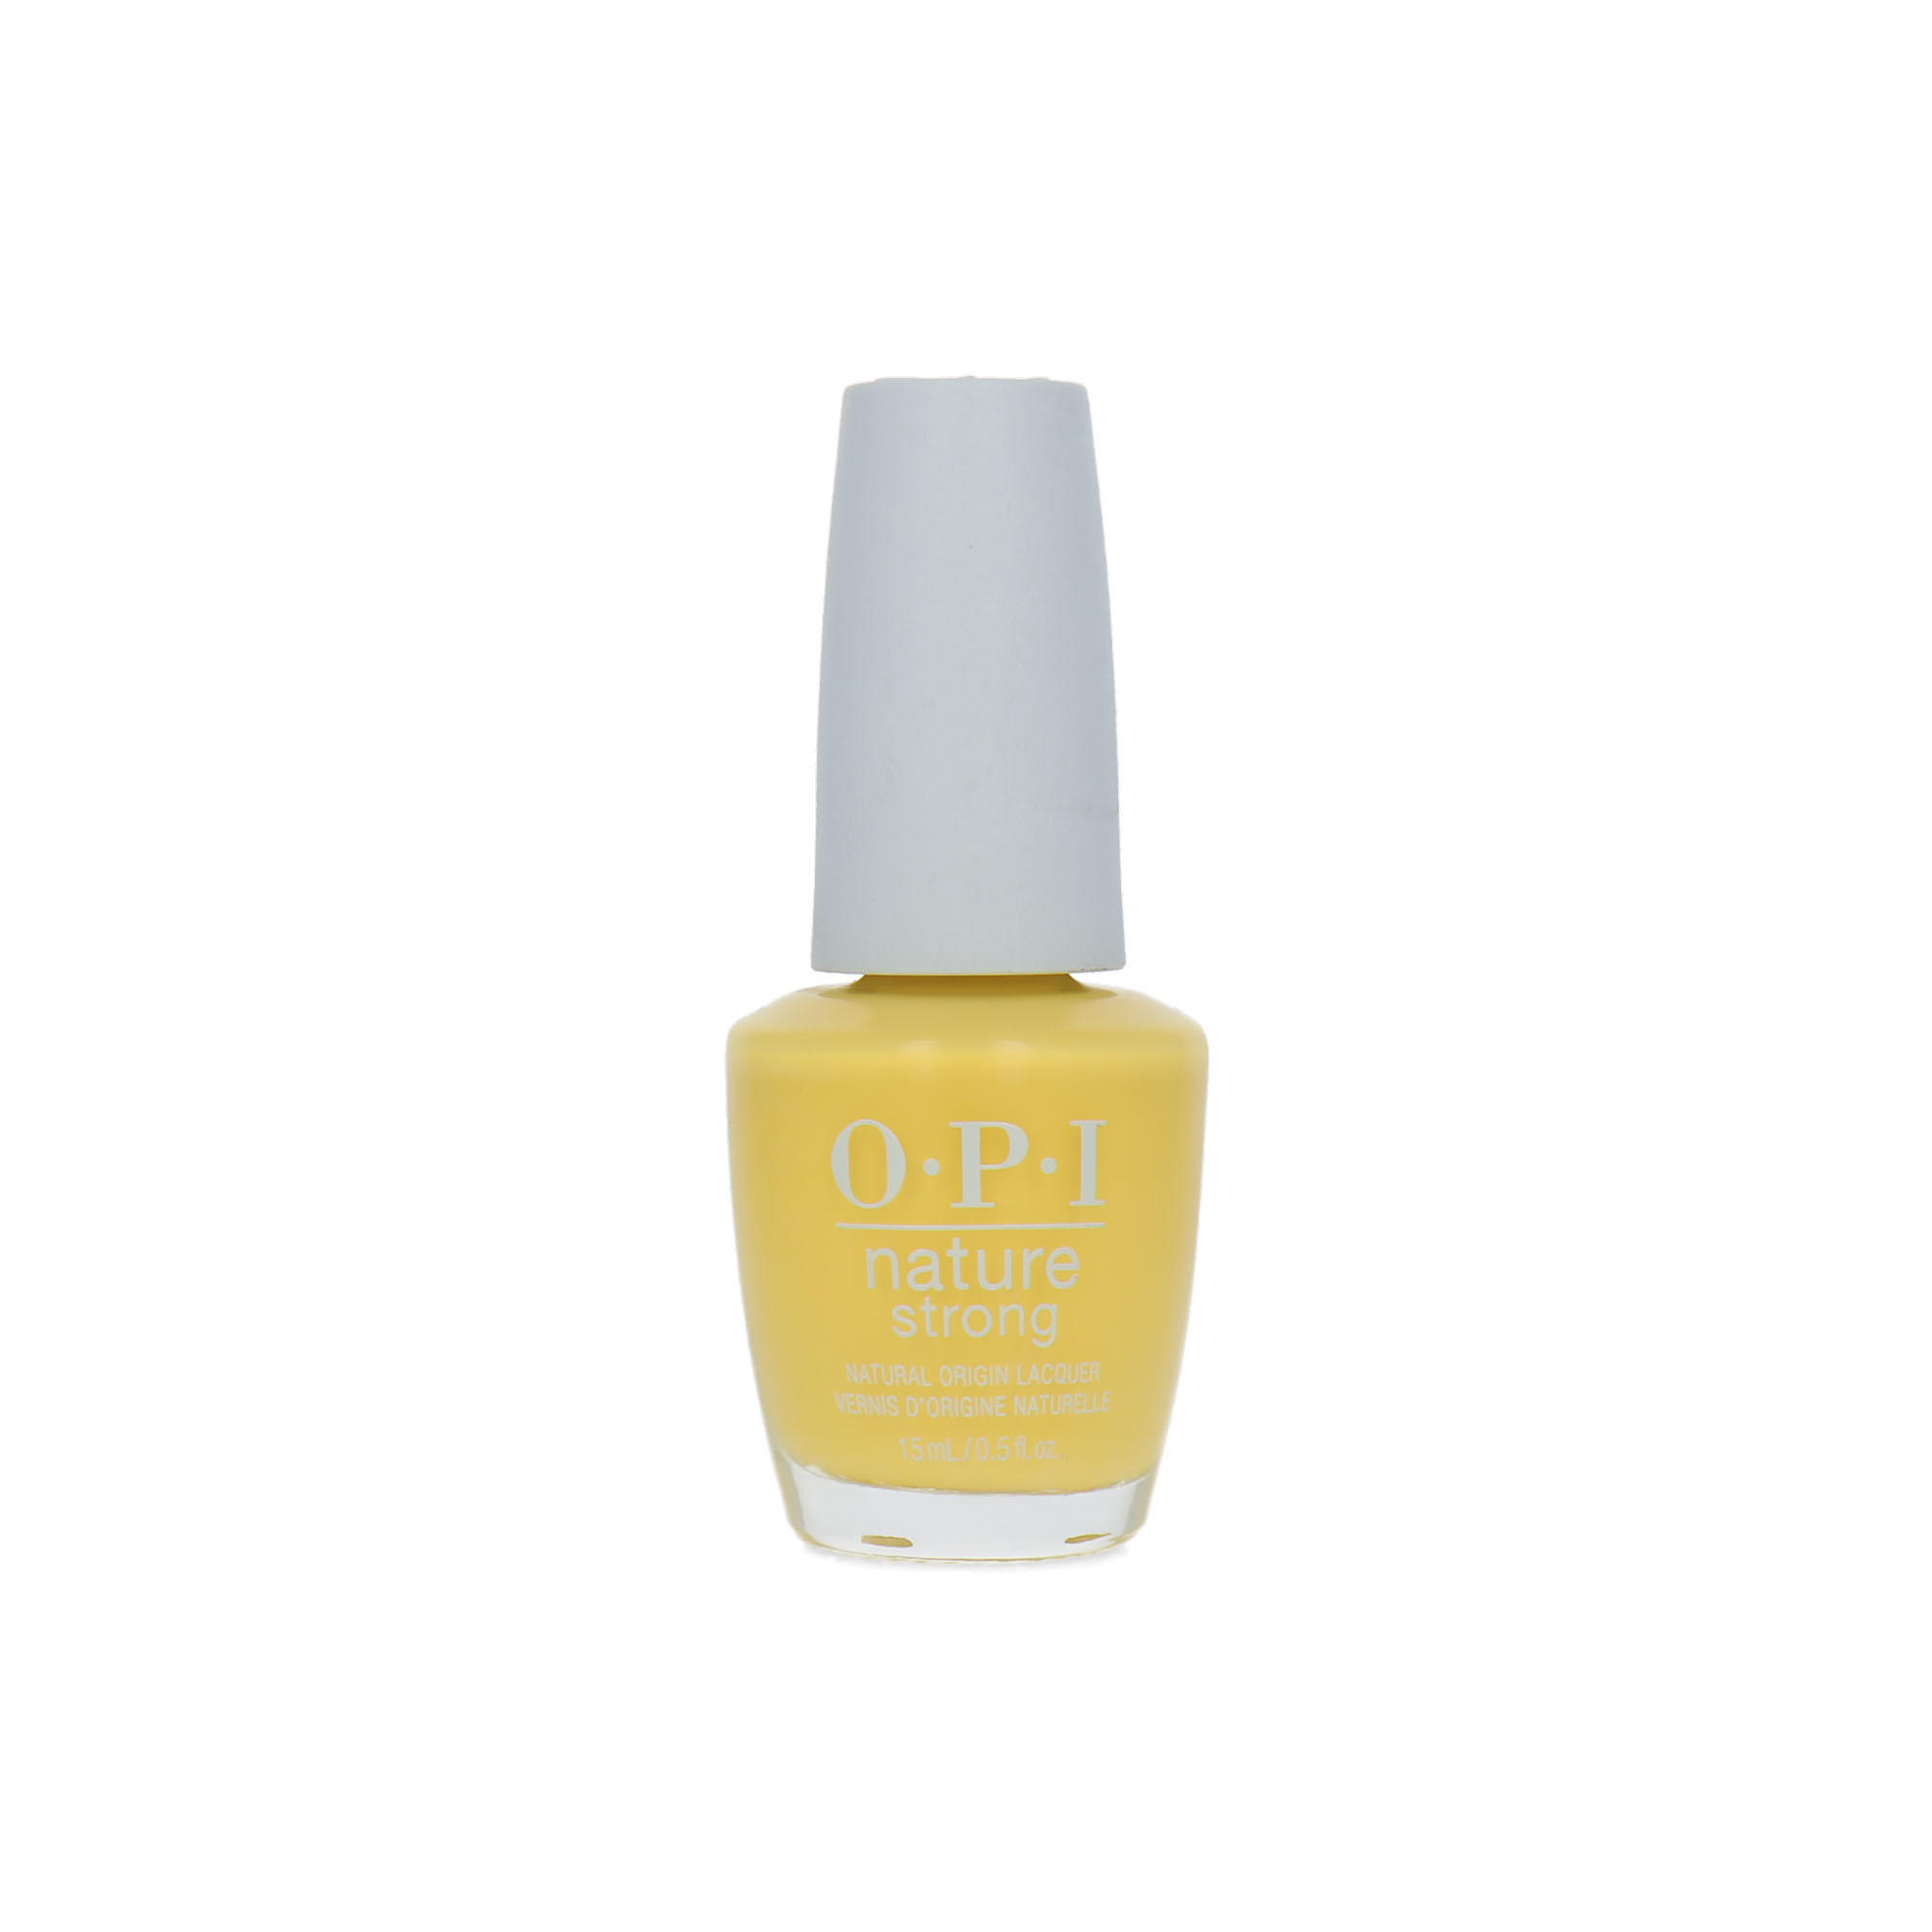 O.P.I Nature Strong Vernis à ongles - Make My Daisy